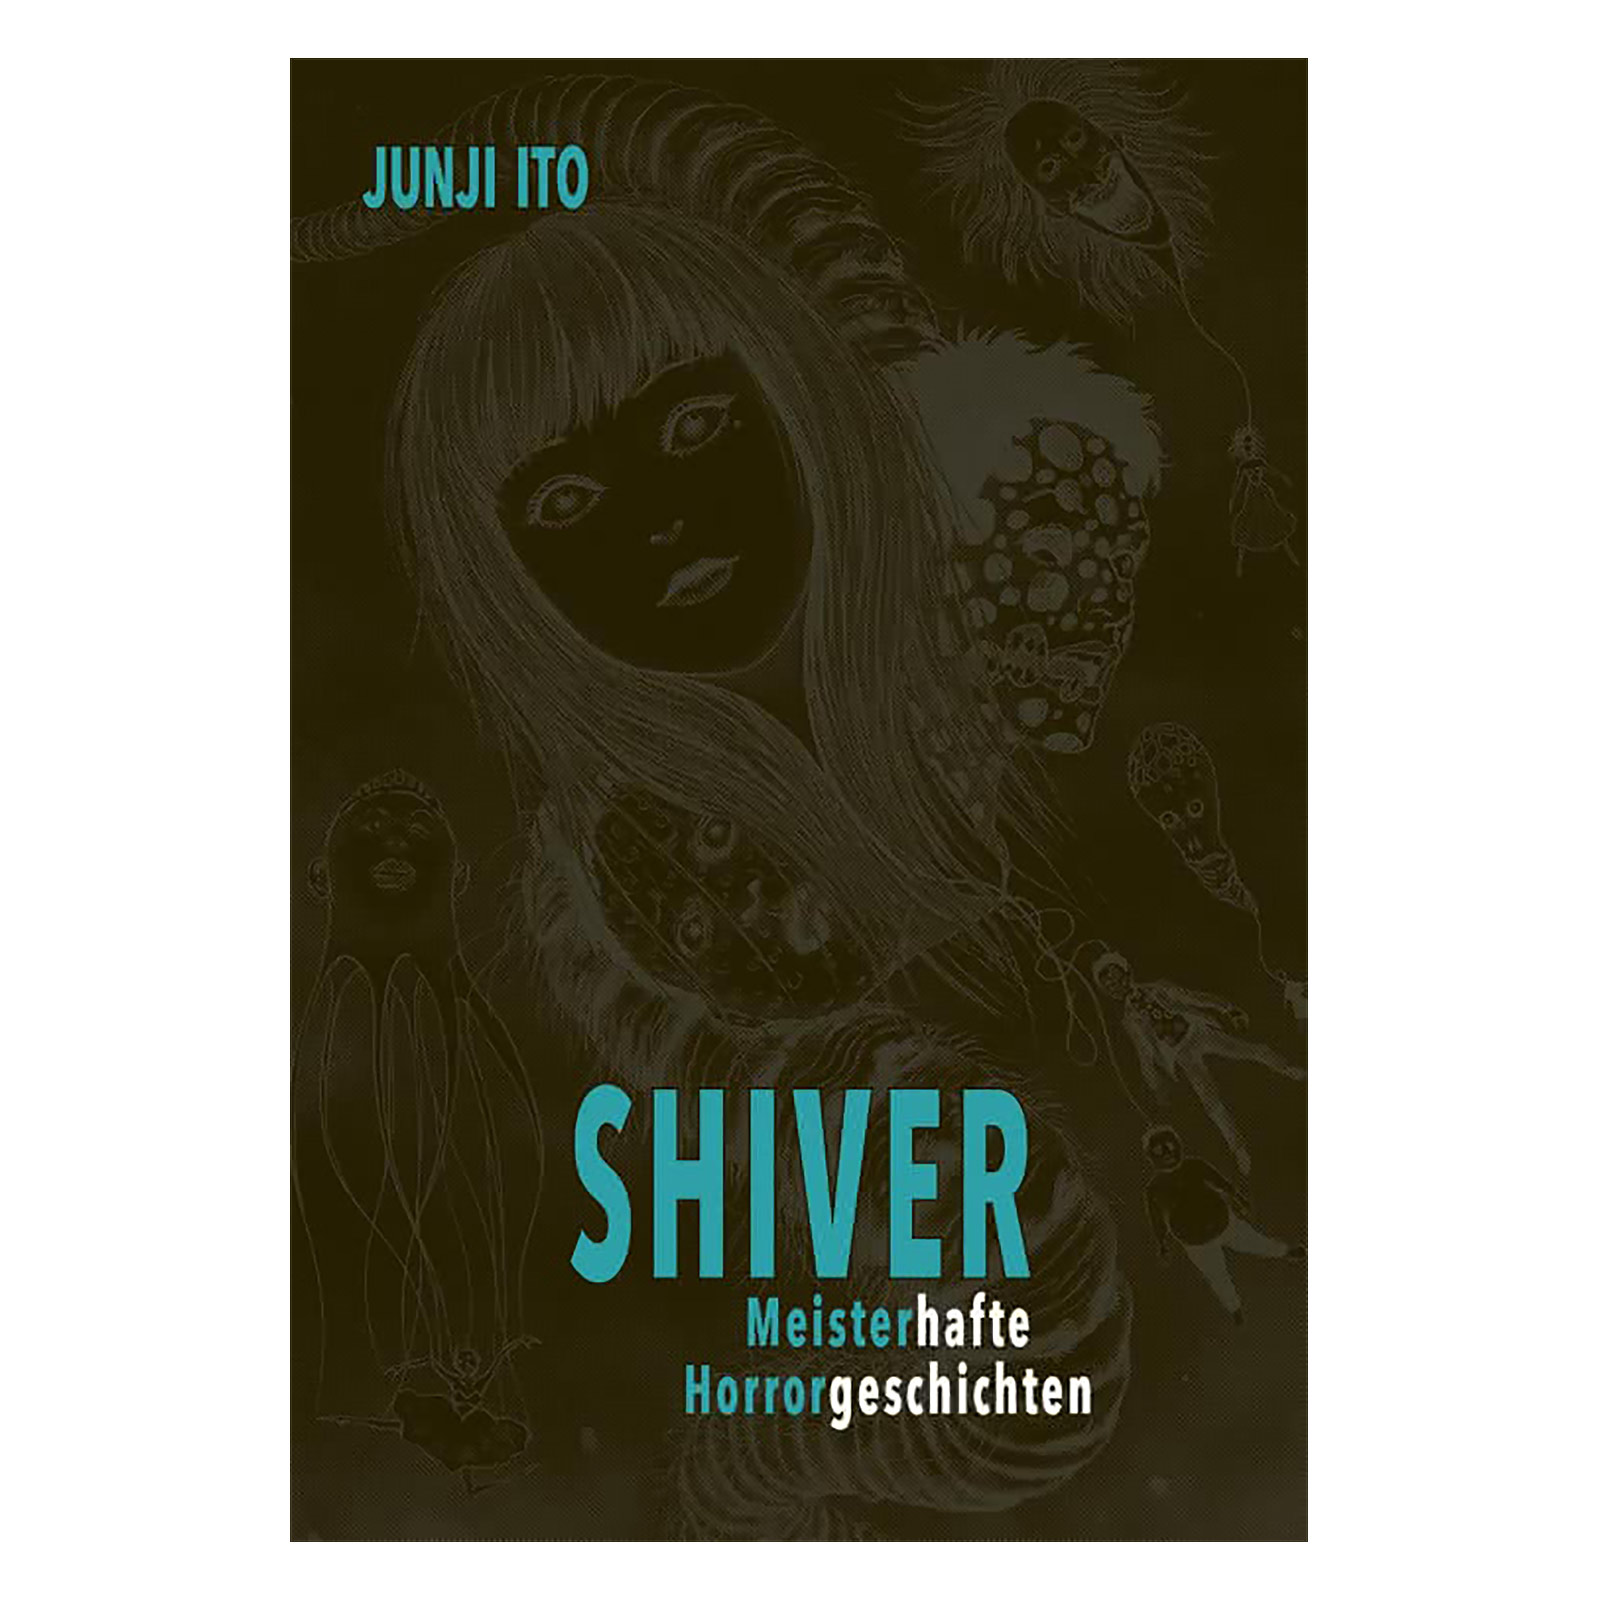 Shiver - Masterful Horror Stories Hardcover Edition